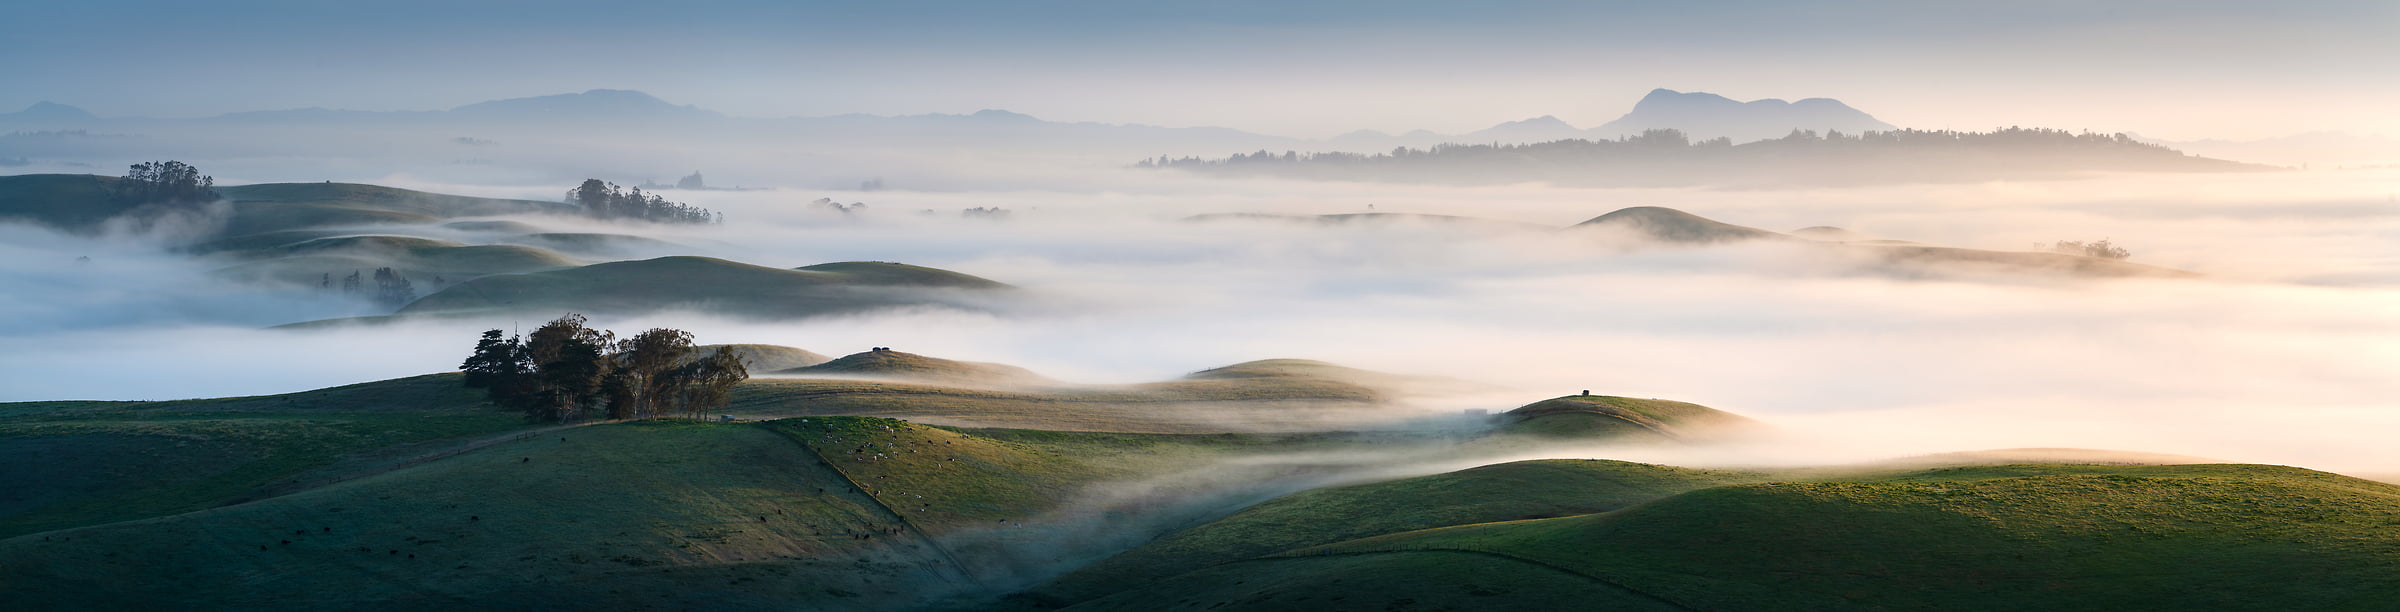 210 megapixels! A very high resolution, large-format VAST photo print of a Sonoma landscape with fog and rolling hills; photograph created by Jeff Lewis in Marin County, California.